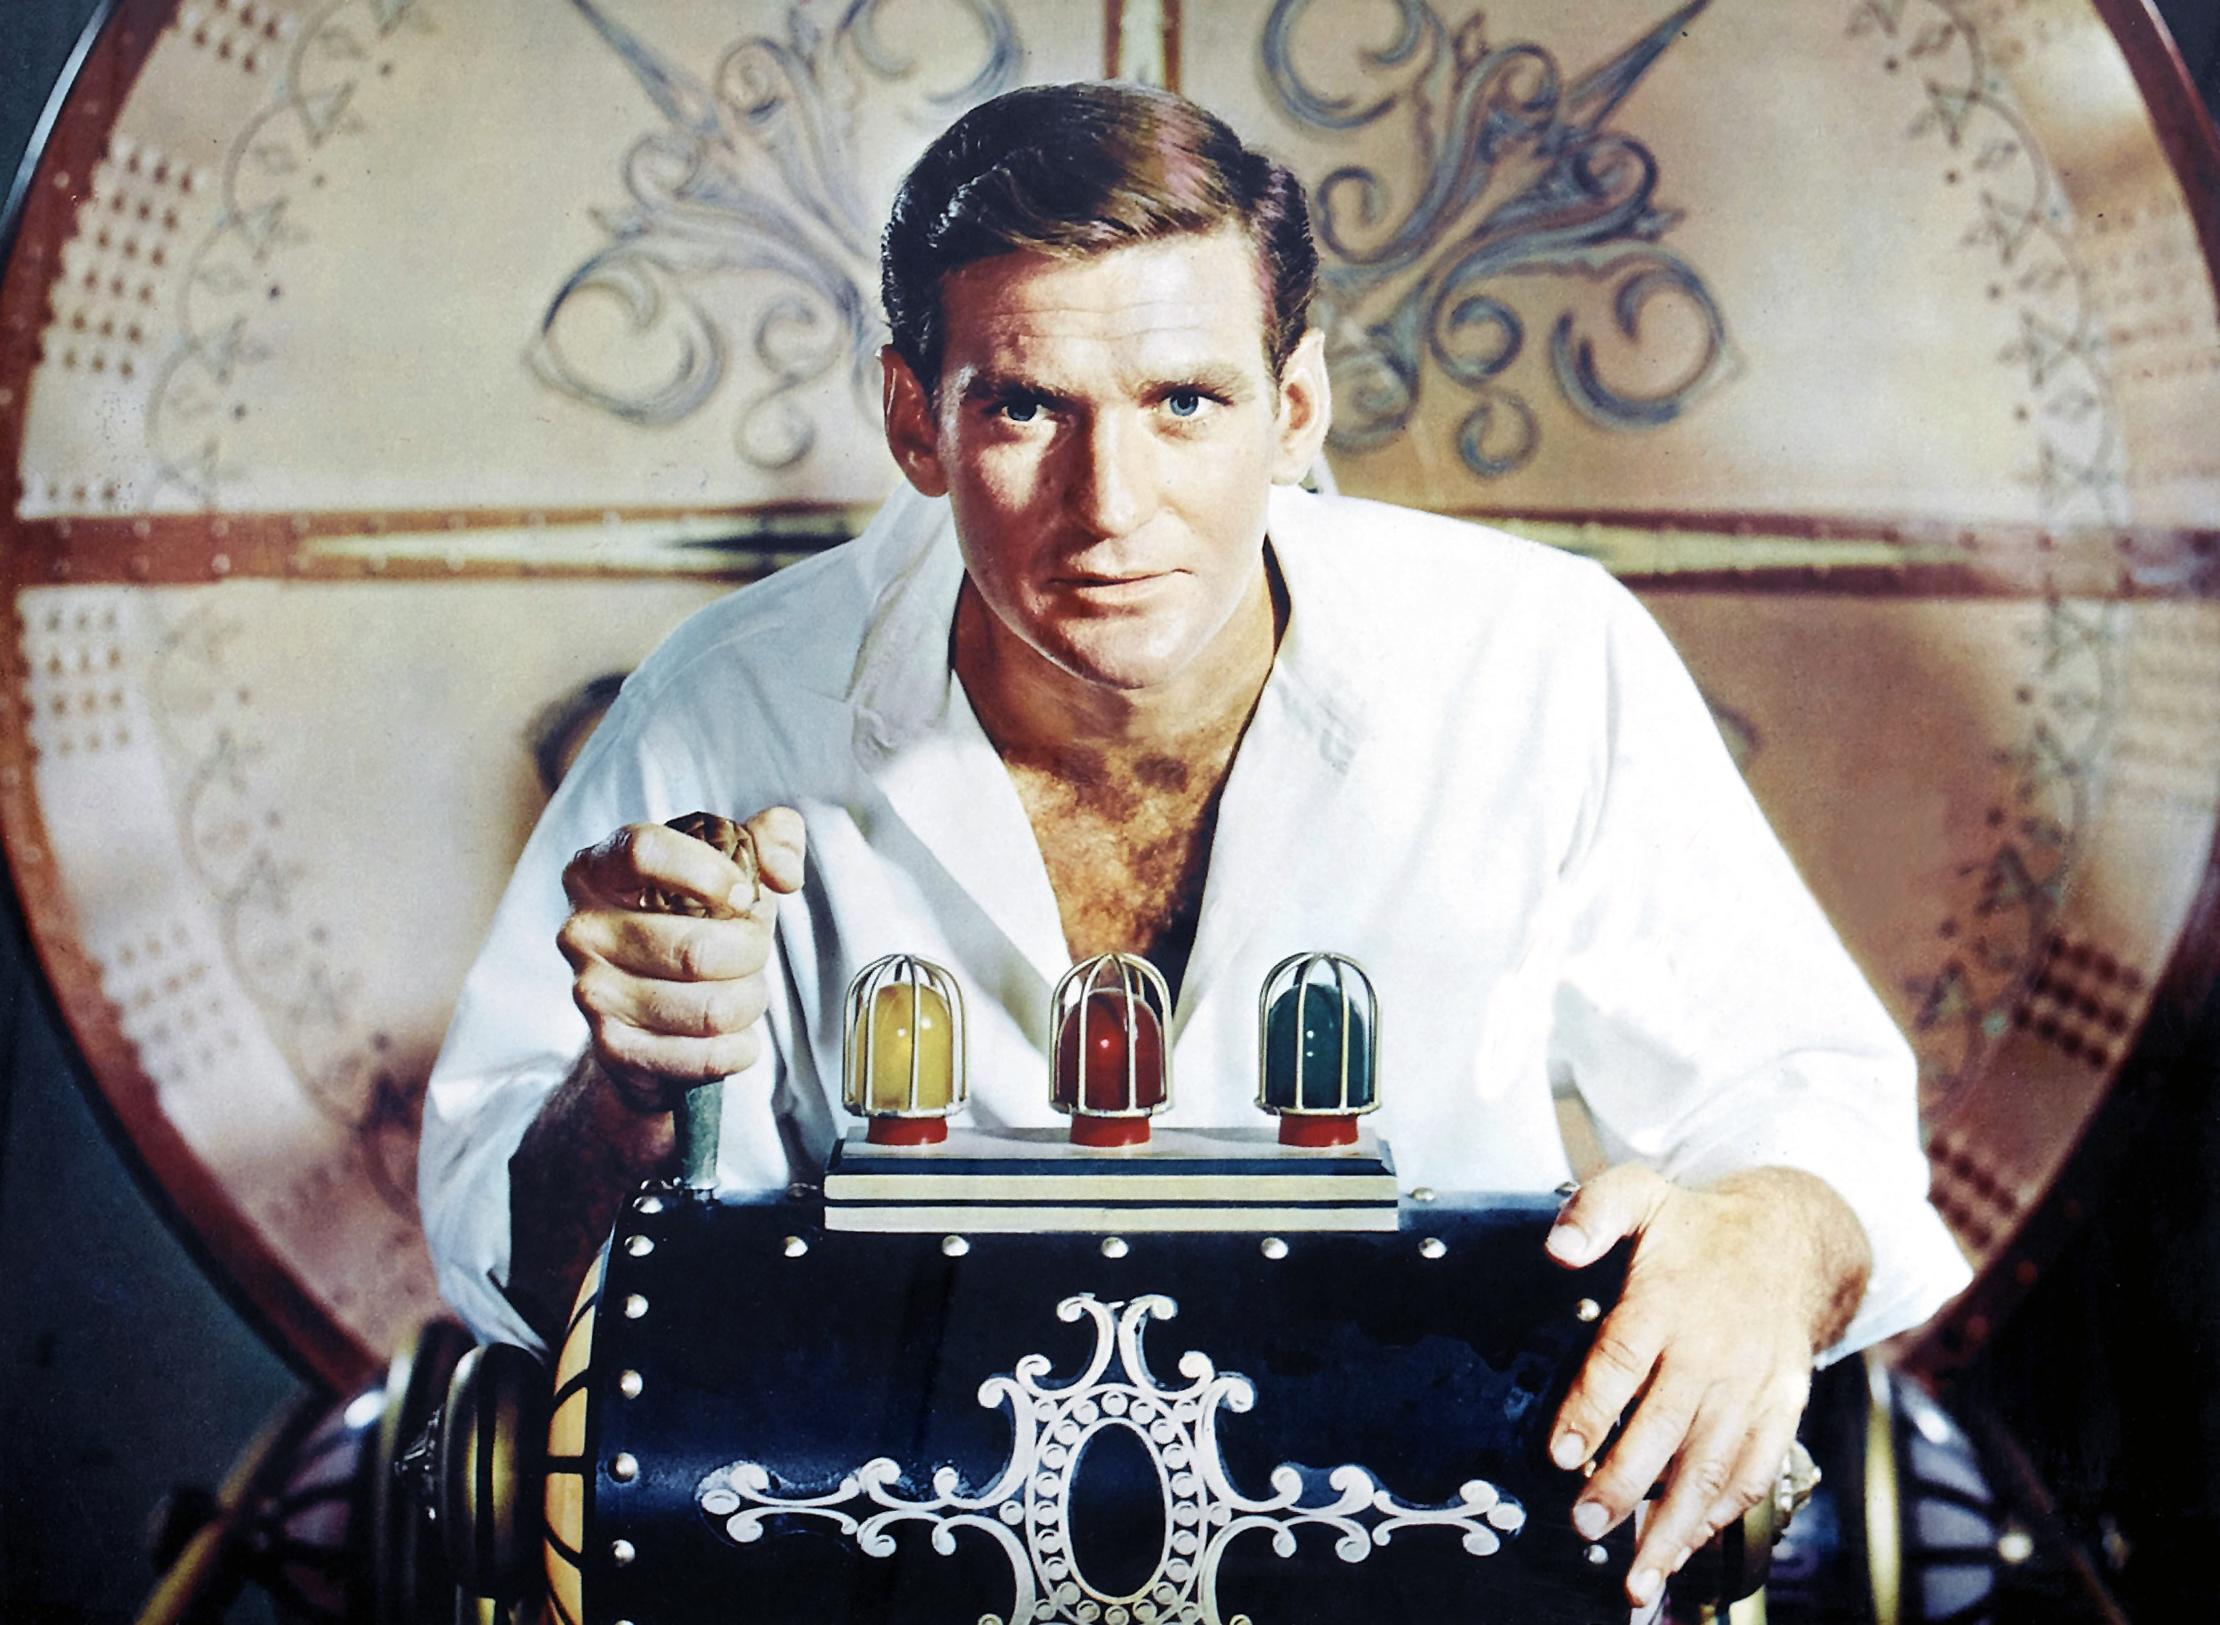 A screenshot of Rod Taylor enthusiastically grabbing a lever on his Time Machine in the 1960 film of the same name